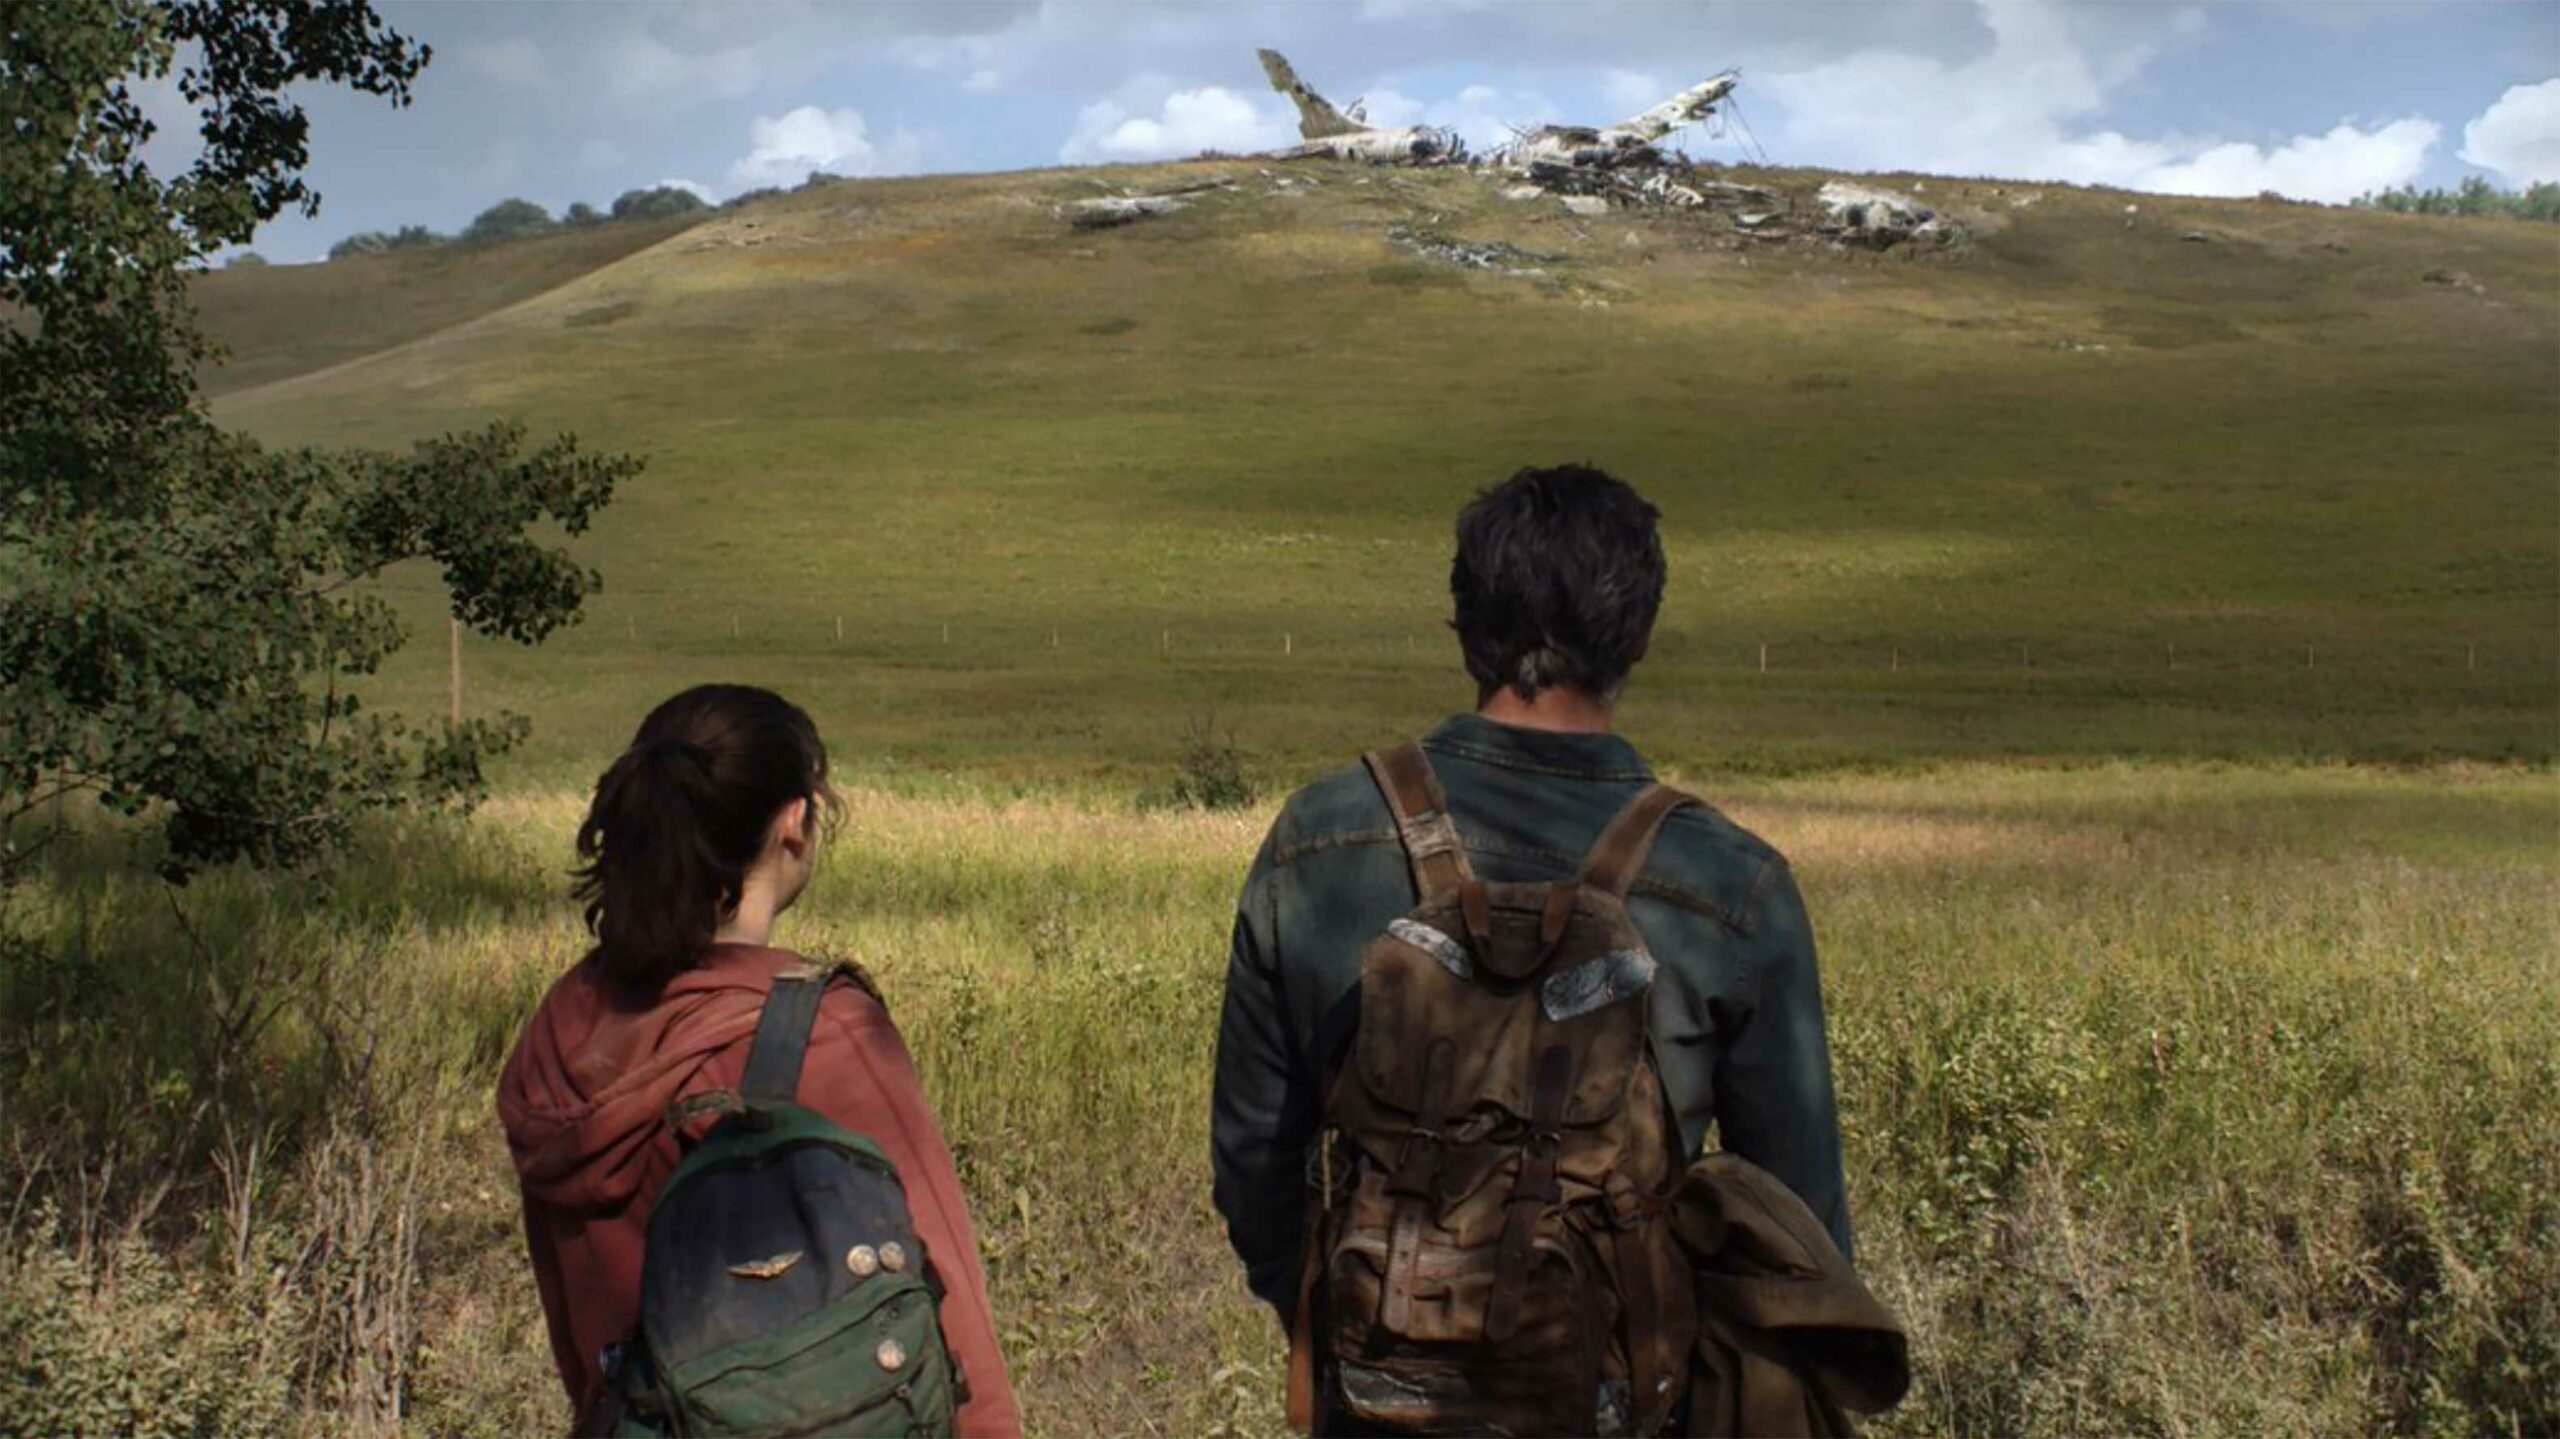 Neil Druckmann Revealed That Sam Raimi's 'The Last of Us' Adaptation Failed  Because the Executives Wanted Everything to Be More 'Bigger & S*xier